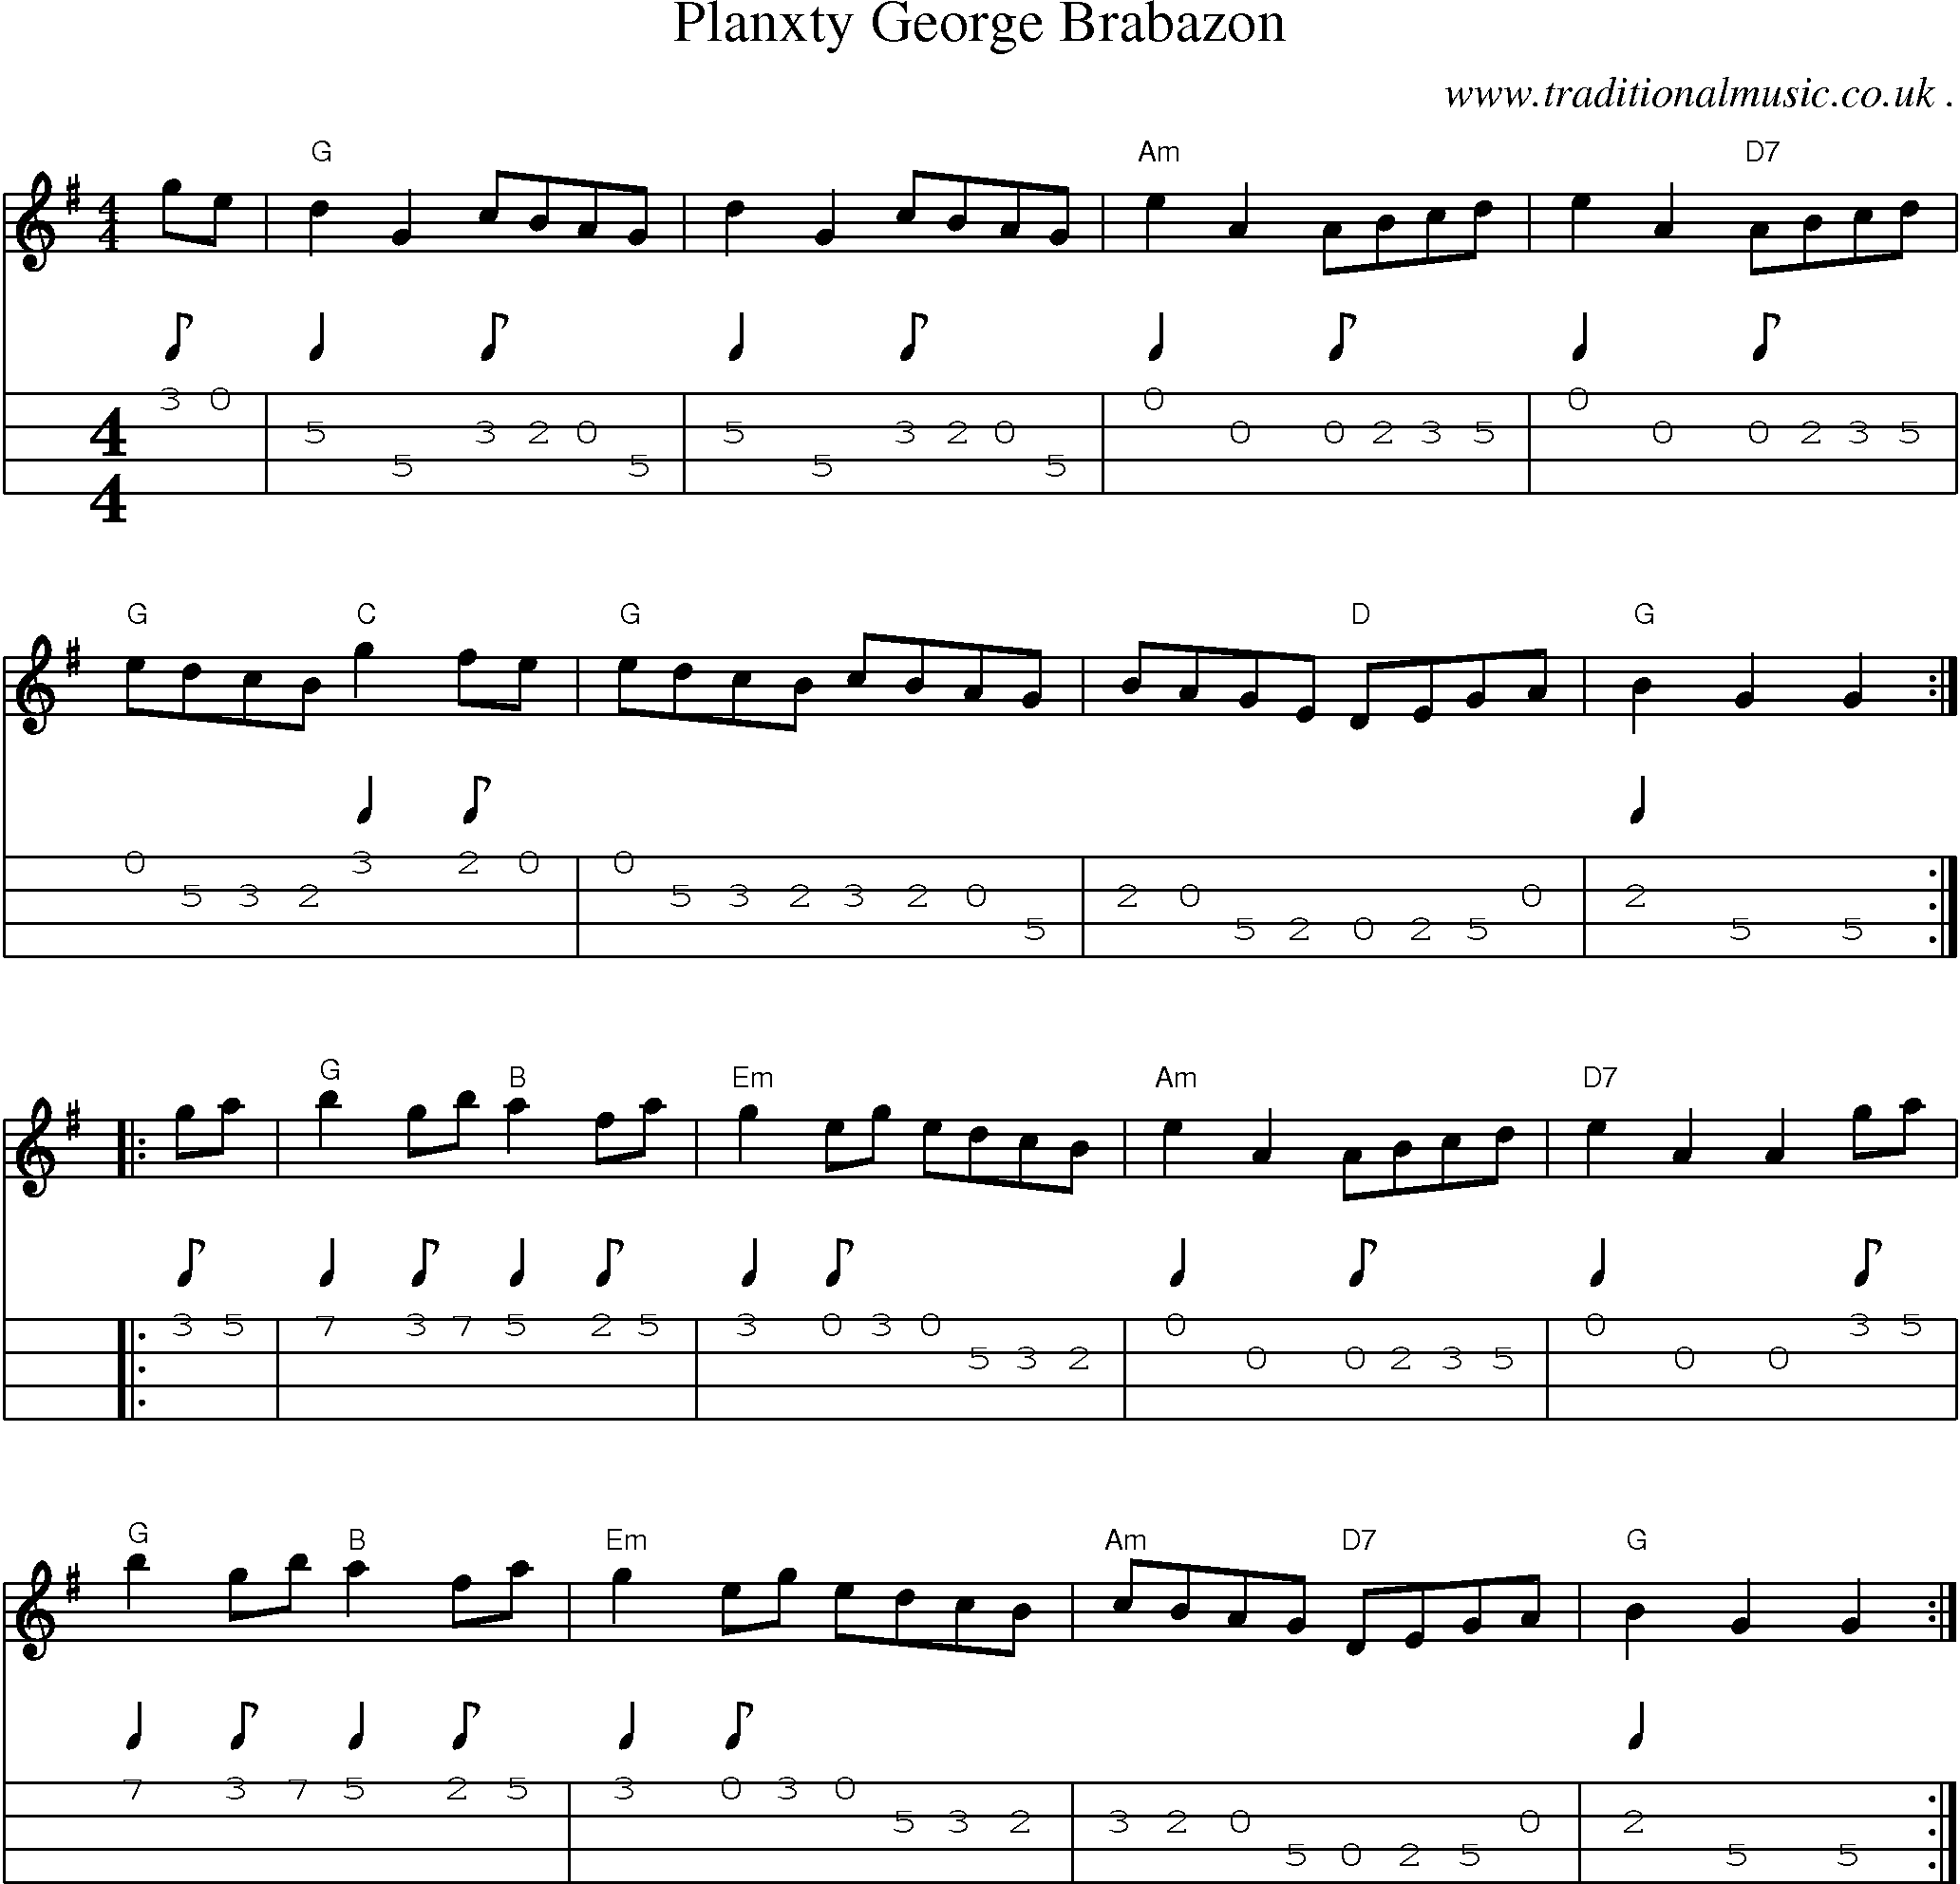 Music Score and Guitar Tabs for Planxty George Brabazon